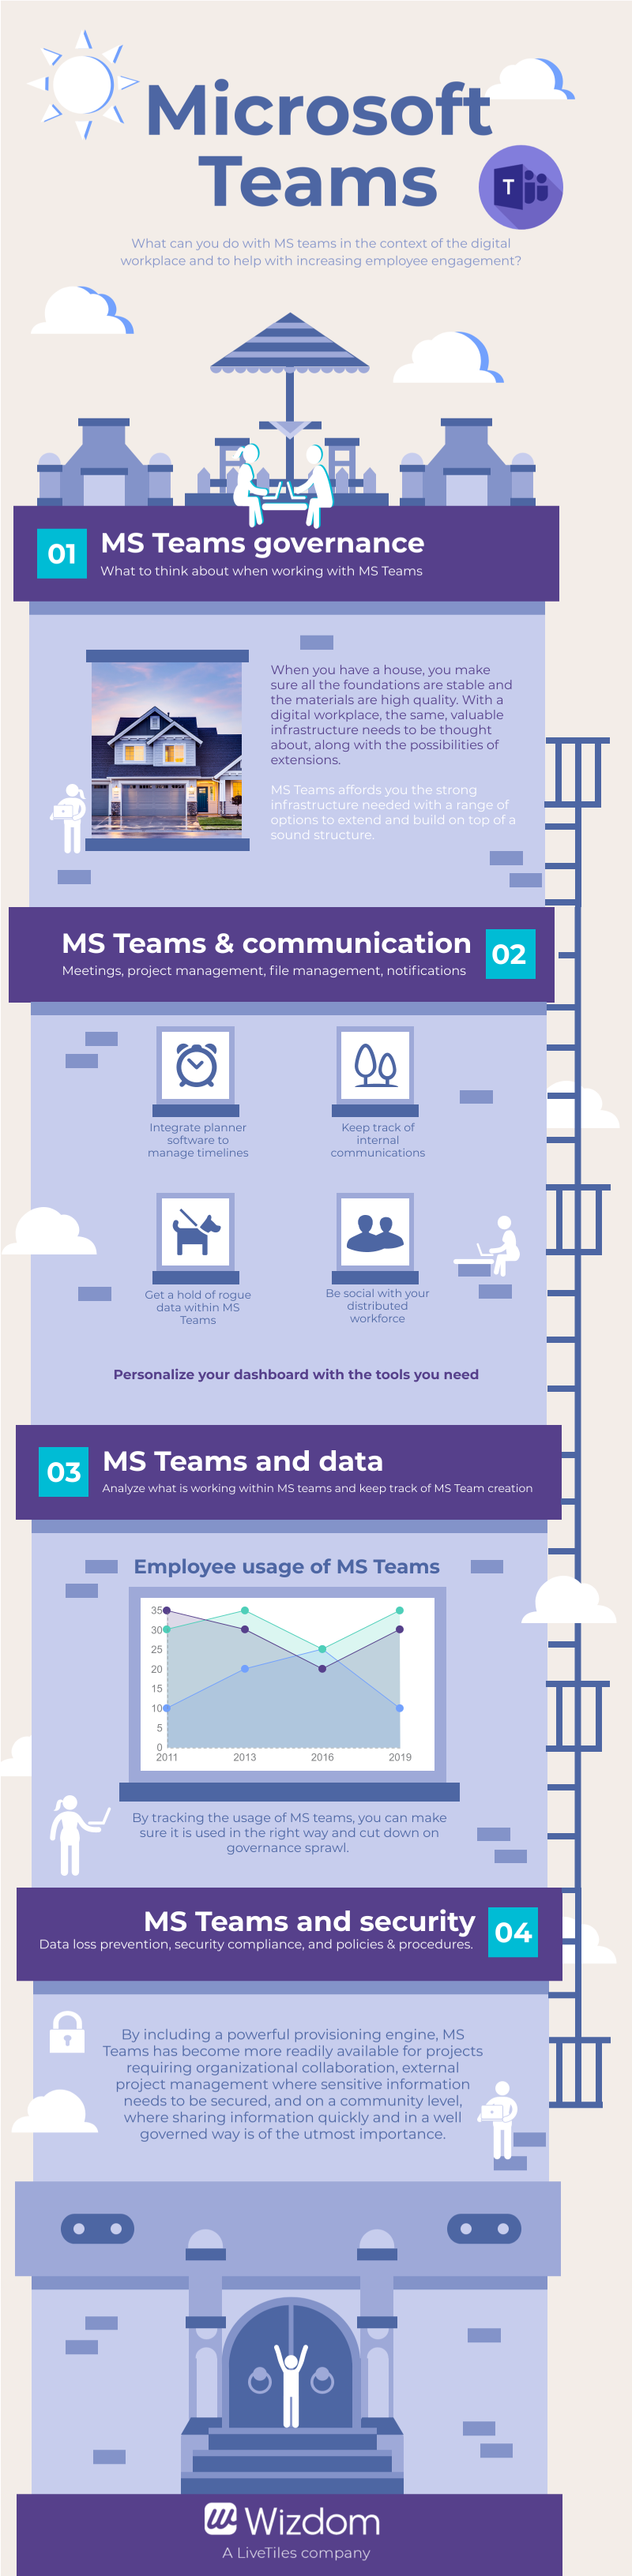 MS Teams infographic